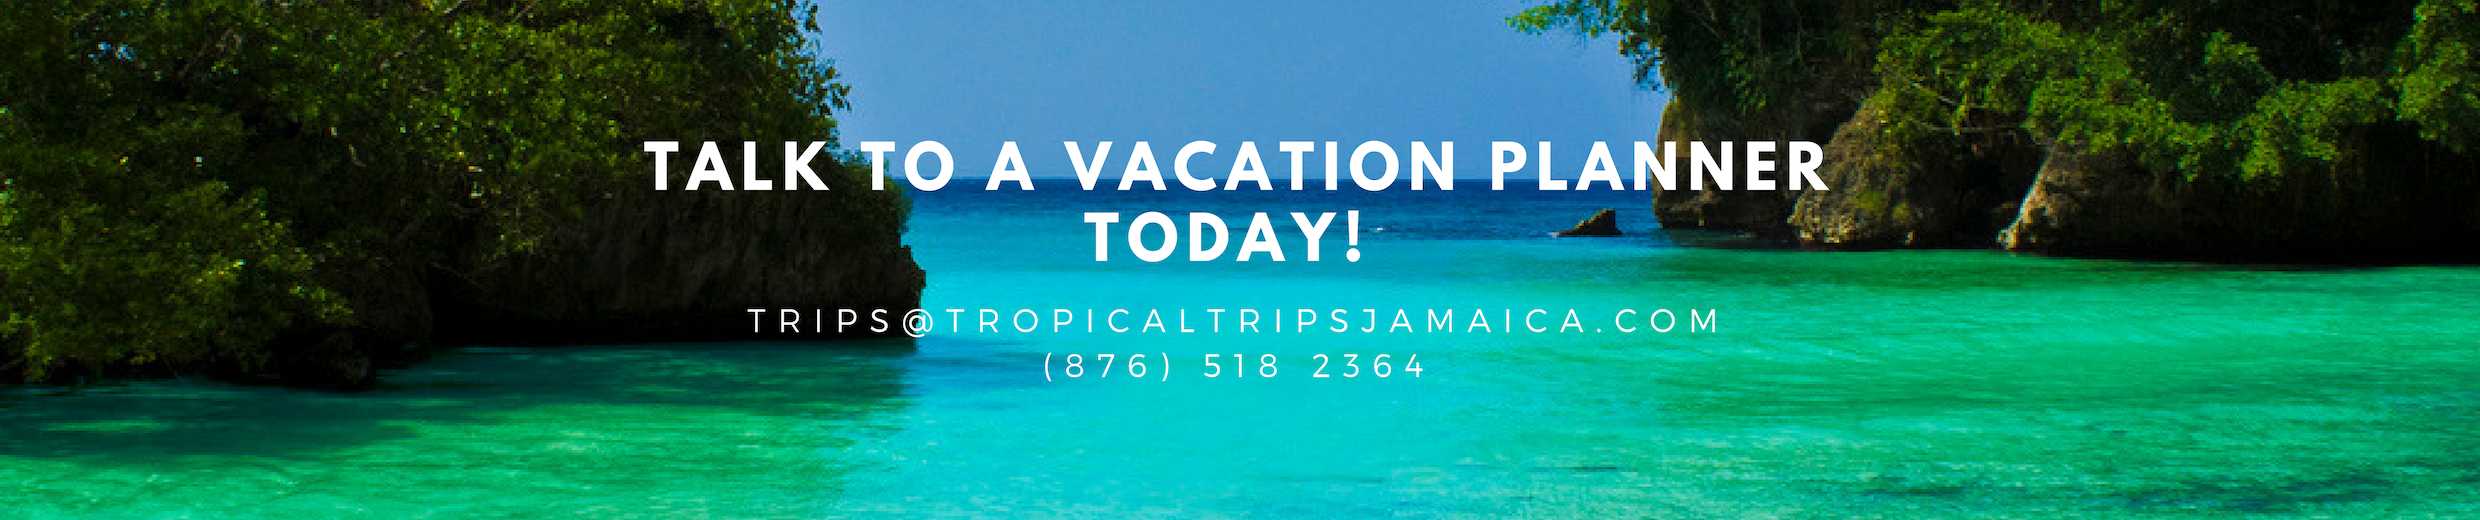 contact us trip planner jamaica